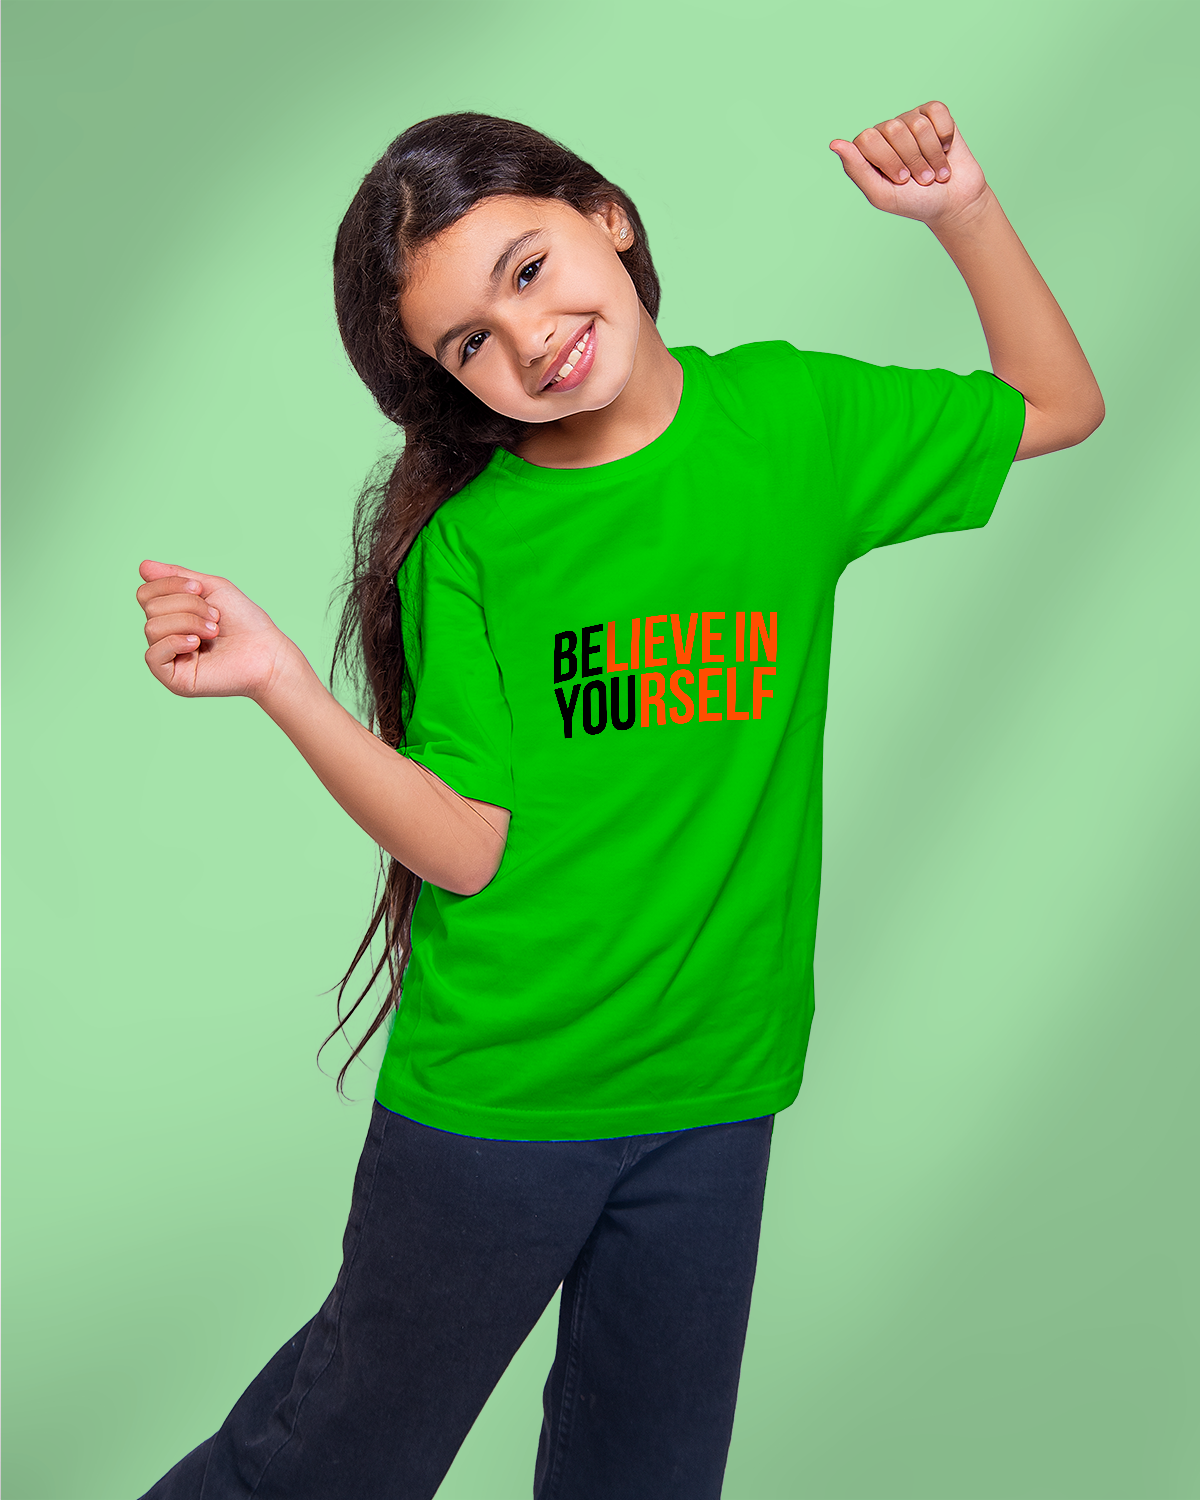 T-shirt For Girls (Believe in Yourself)